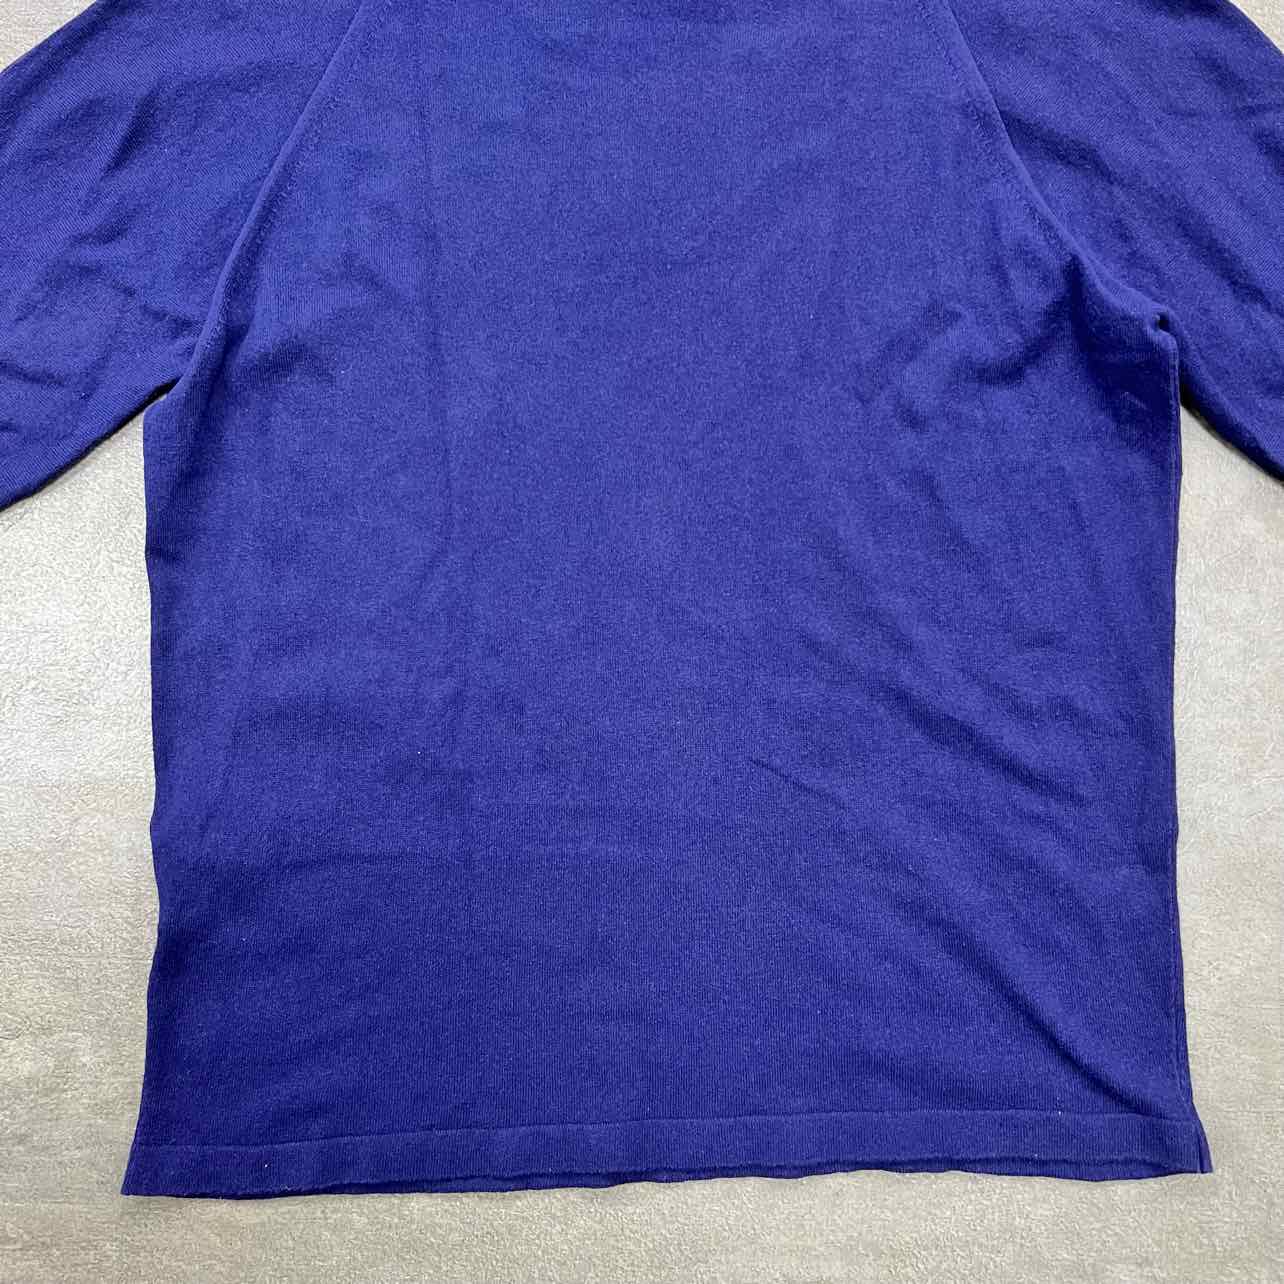 Stone Island T-Shirt "COMPASS" Navy Used Size M